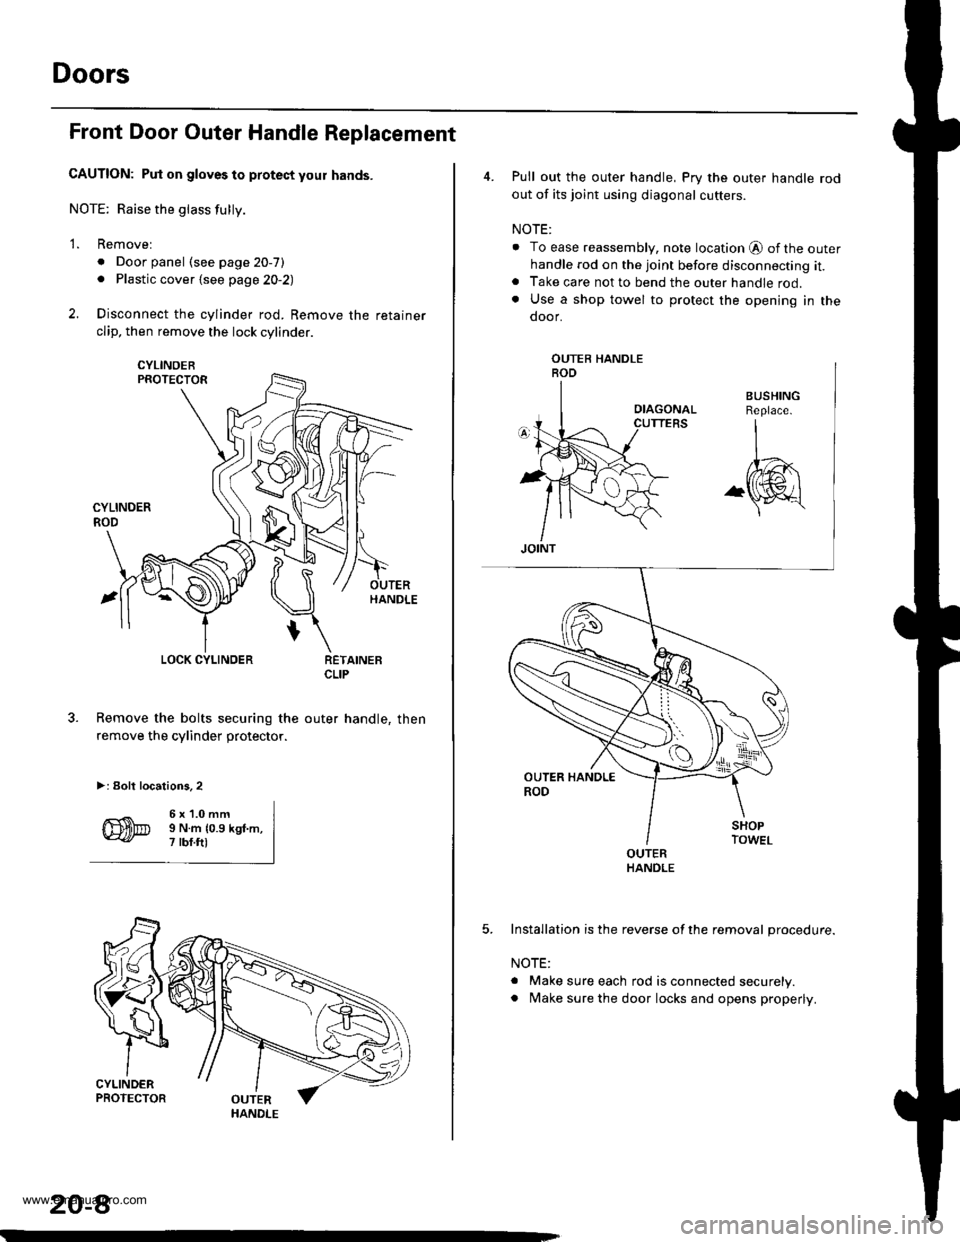 HONDA CR-V 1998 RD1-RD3 / 1.G Workshop Manual 
Doors
Front Door Outer Handle Replacement
CAUTION: Put on gloves to protect your hands.
NOTE; Raise the glass fully.
2.
1.Removel
. Door panel (see page 20-7). Plastic cover {see page 2O-2)
Disconnec